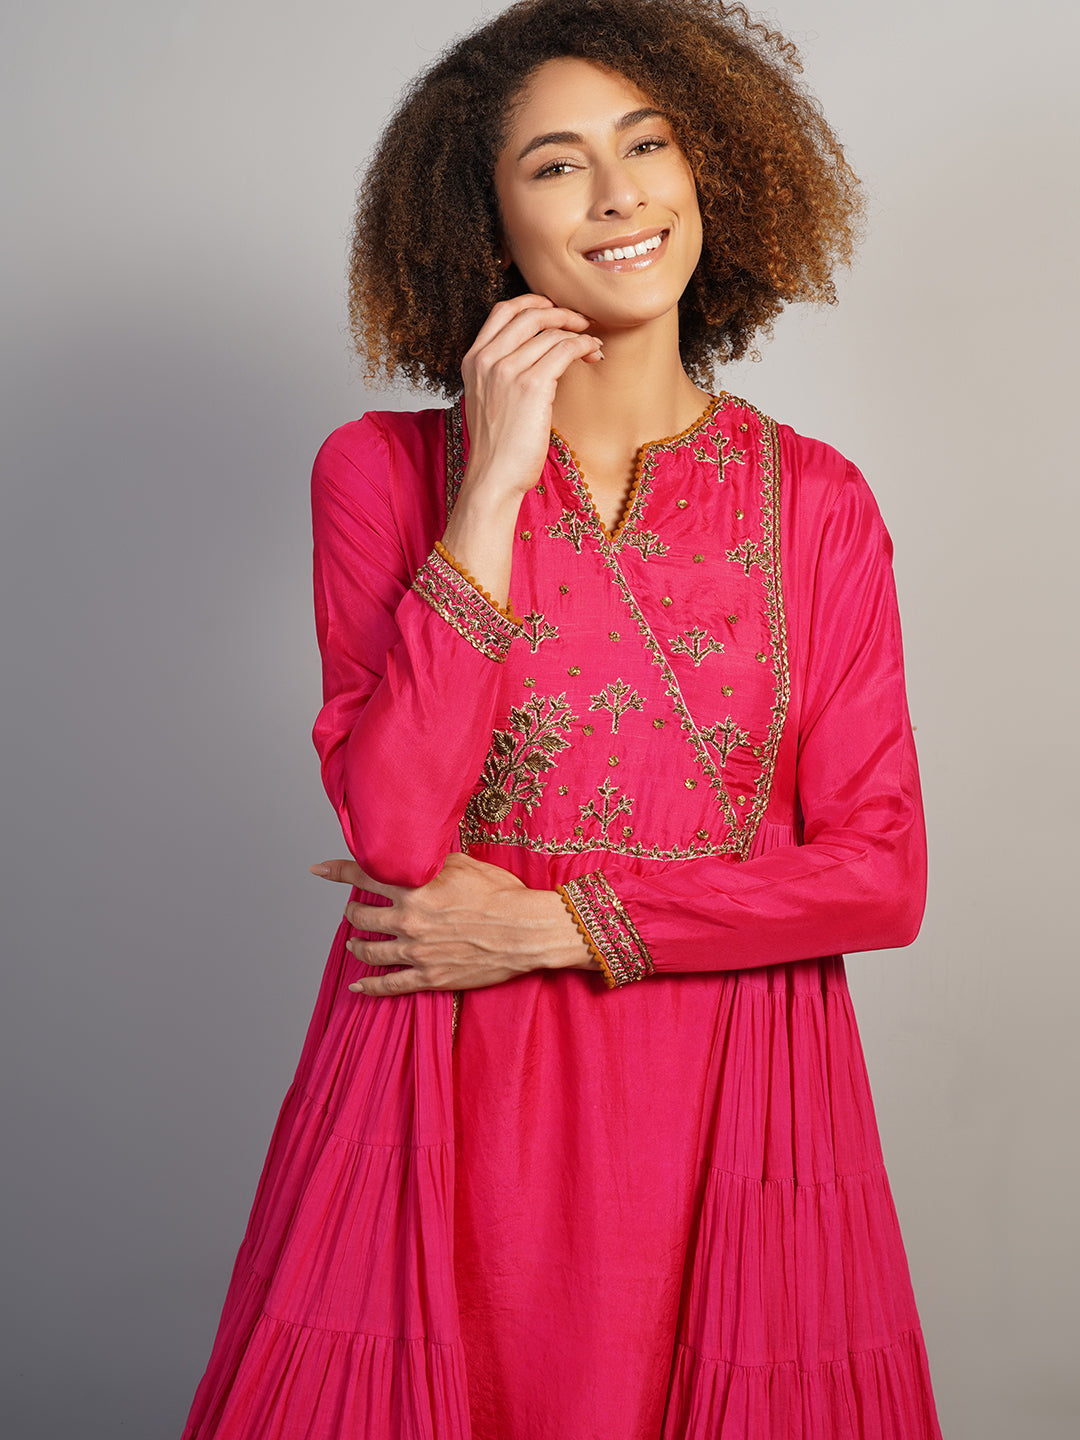 An A-line, tiered kurta in cotton along with silk sleeves